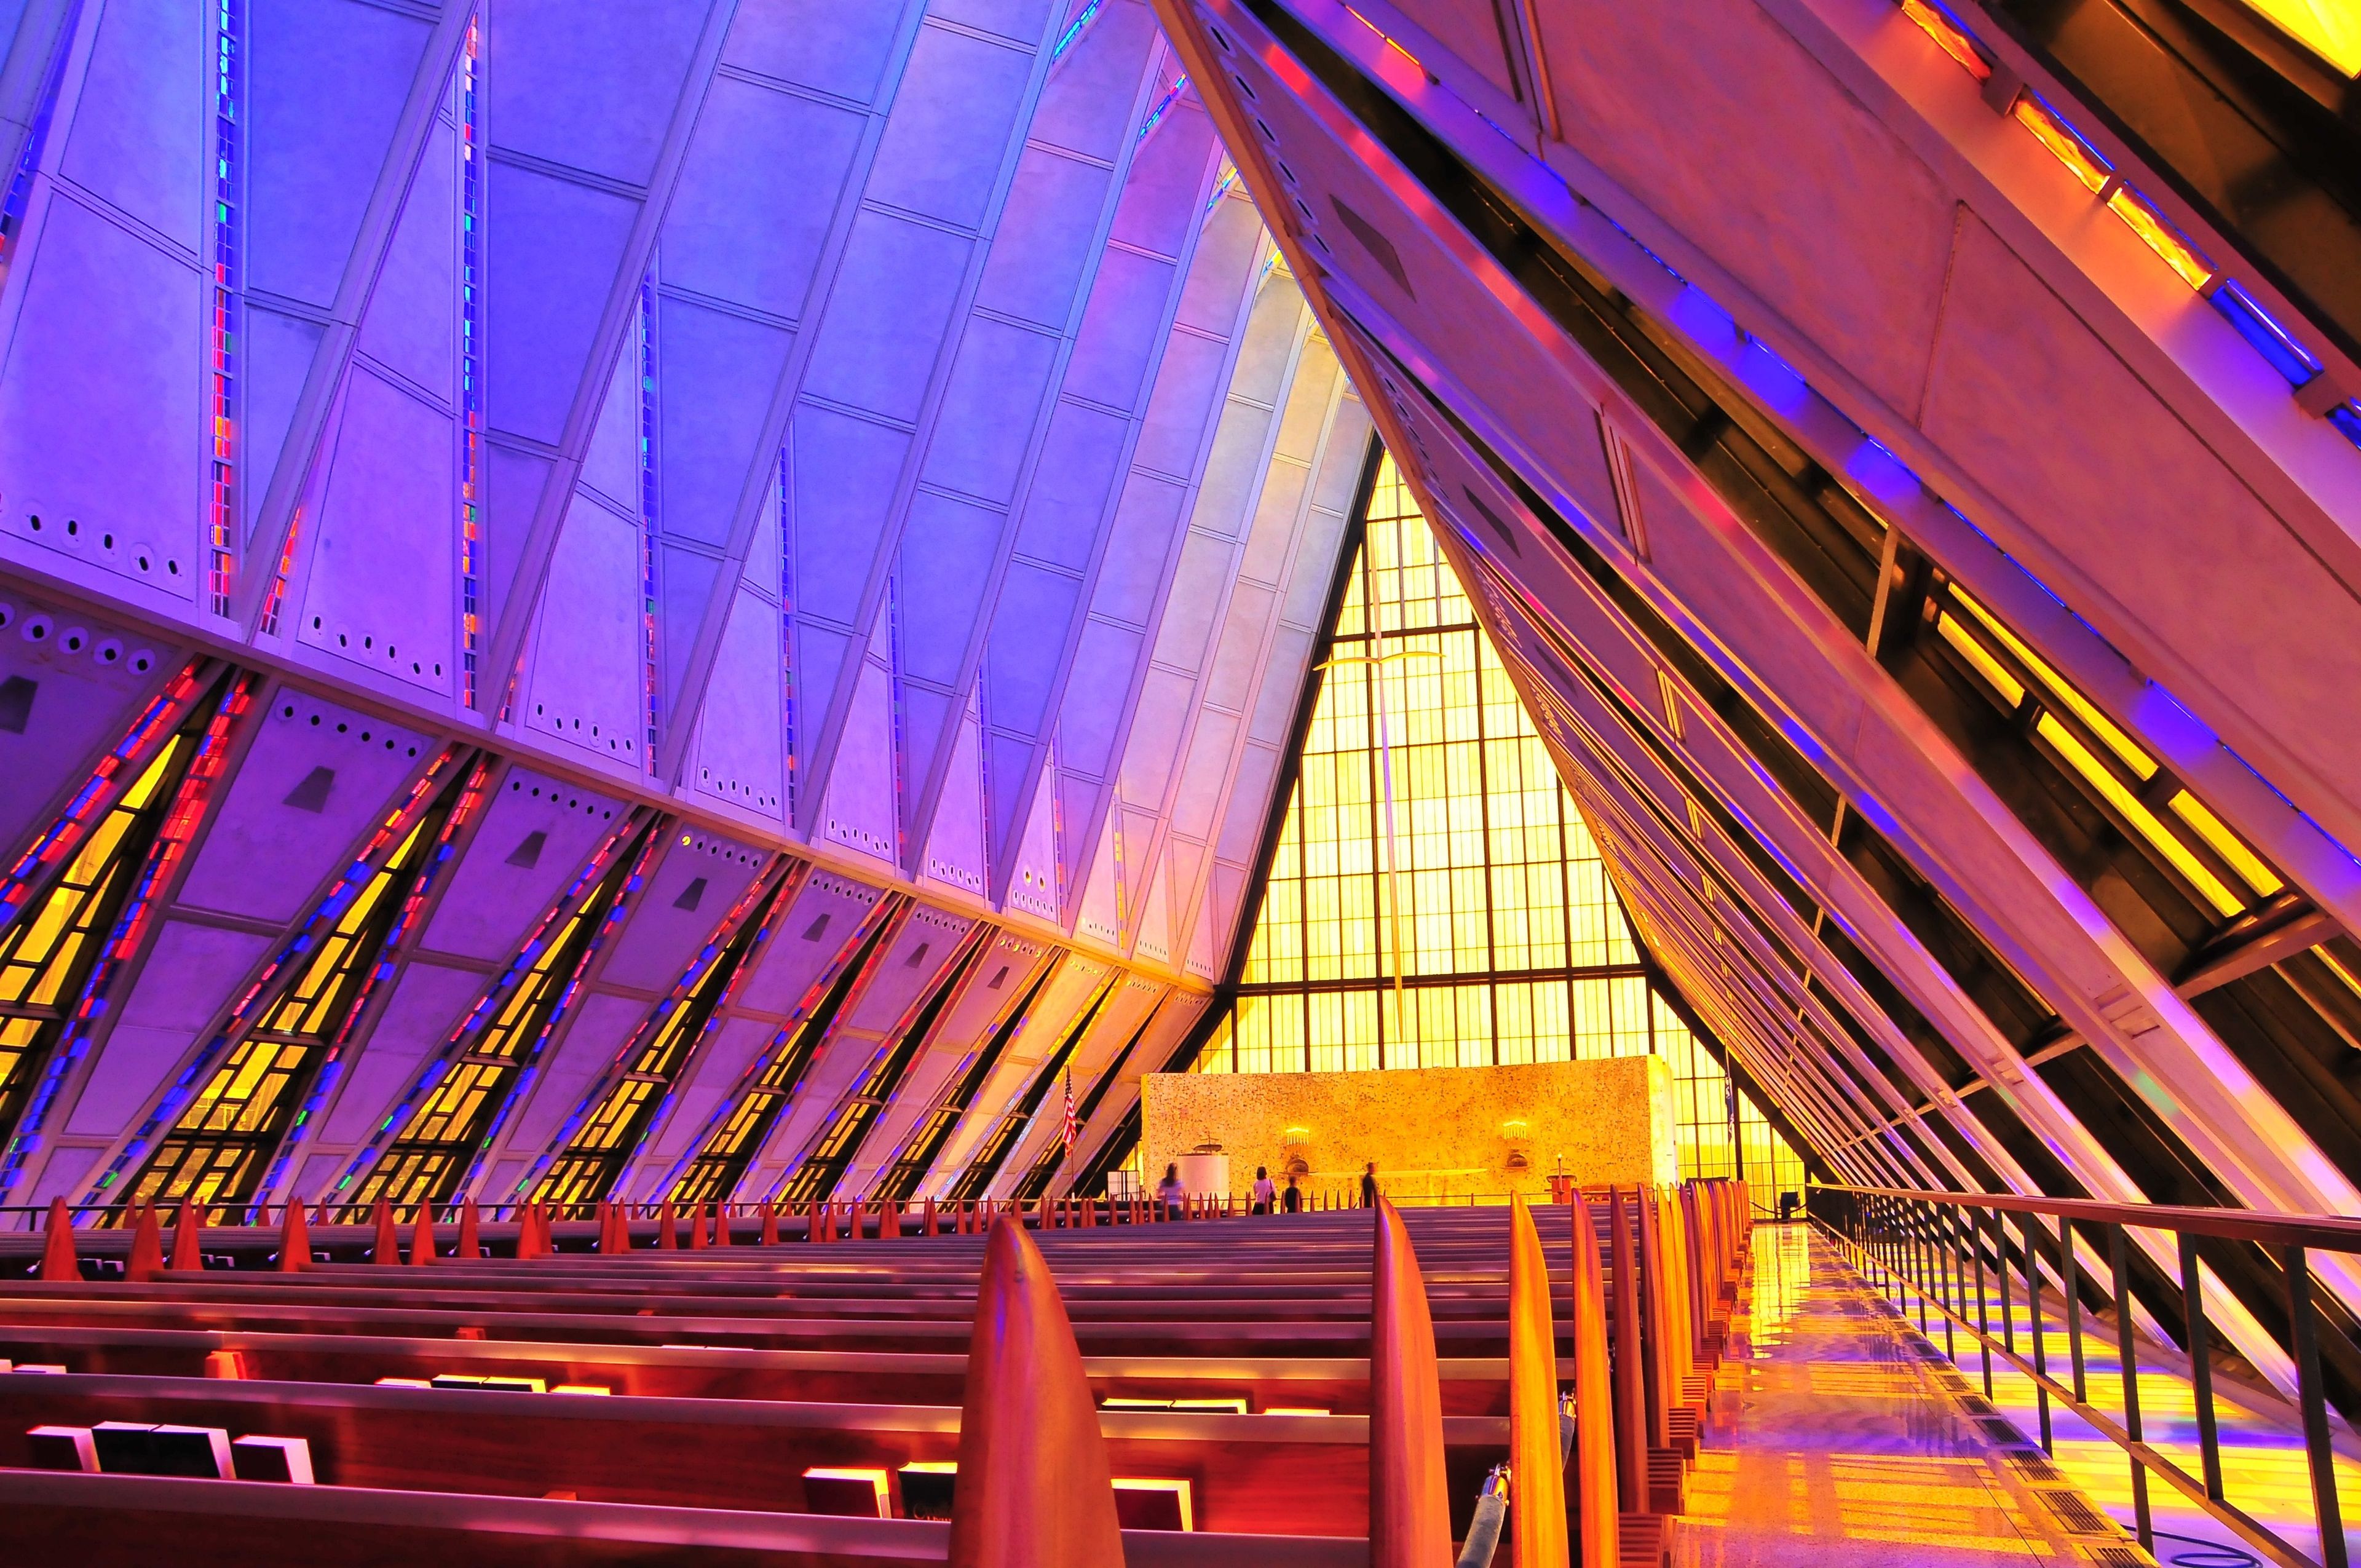 Inside a chapel at the Air Force Academy.